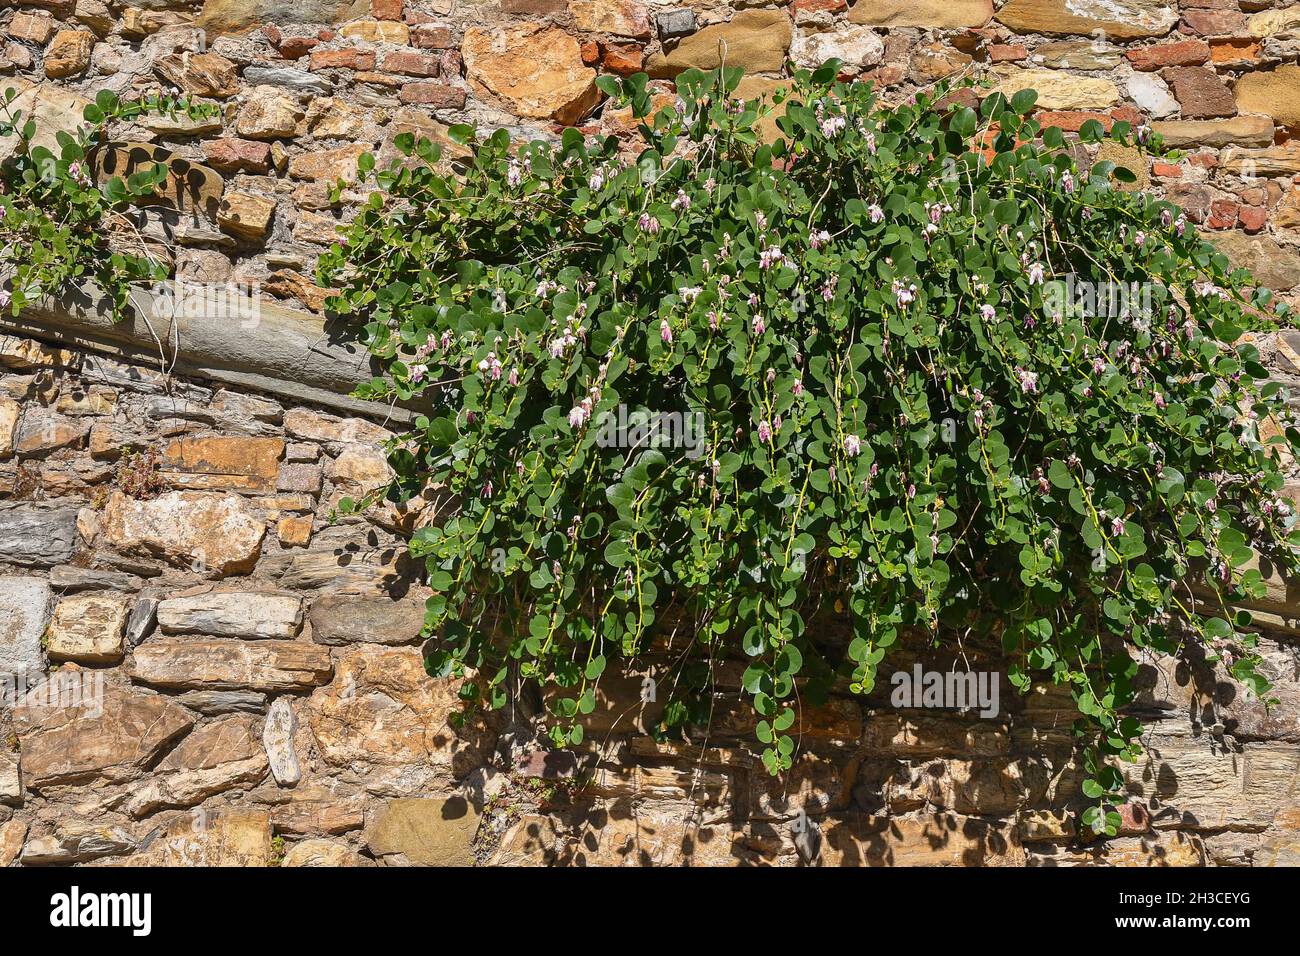 A flowering plant of caper (Capparis spinosa) grown on a brick and stone wall, Tuscany, Italy Stock Photo